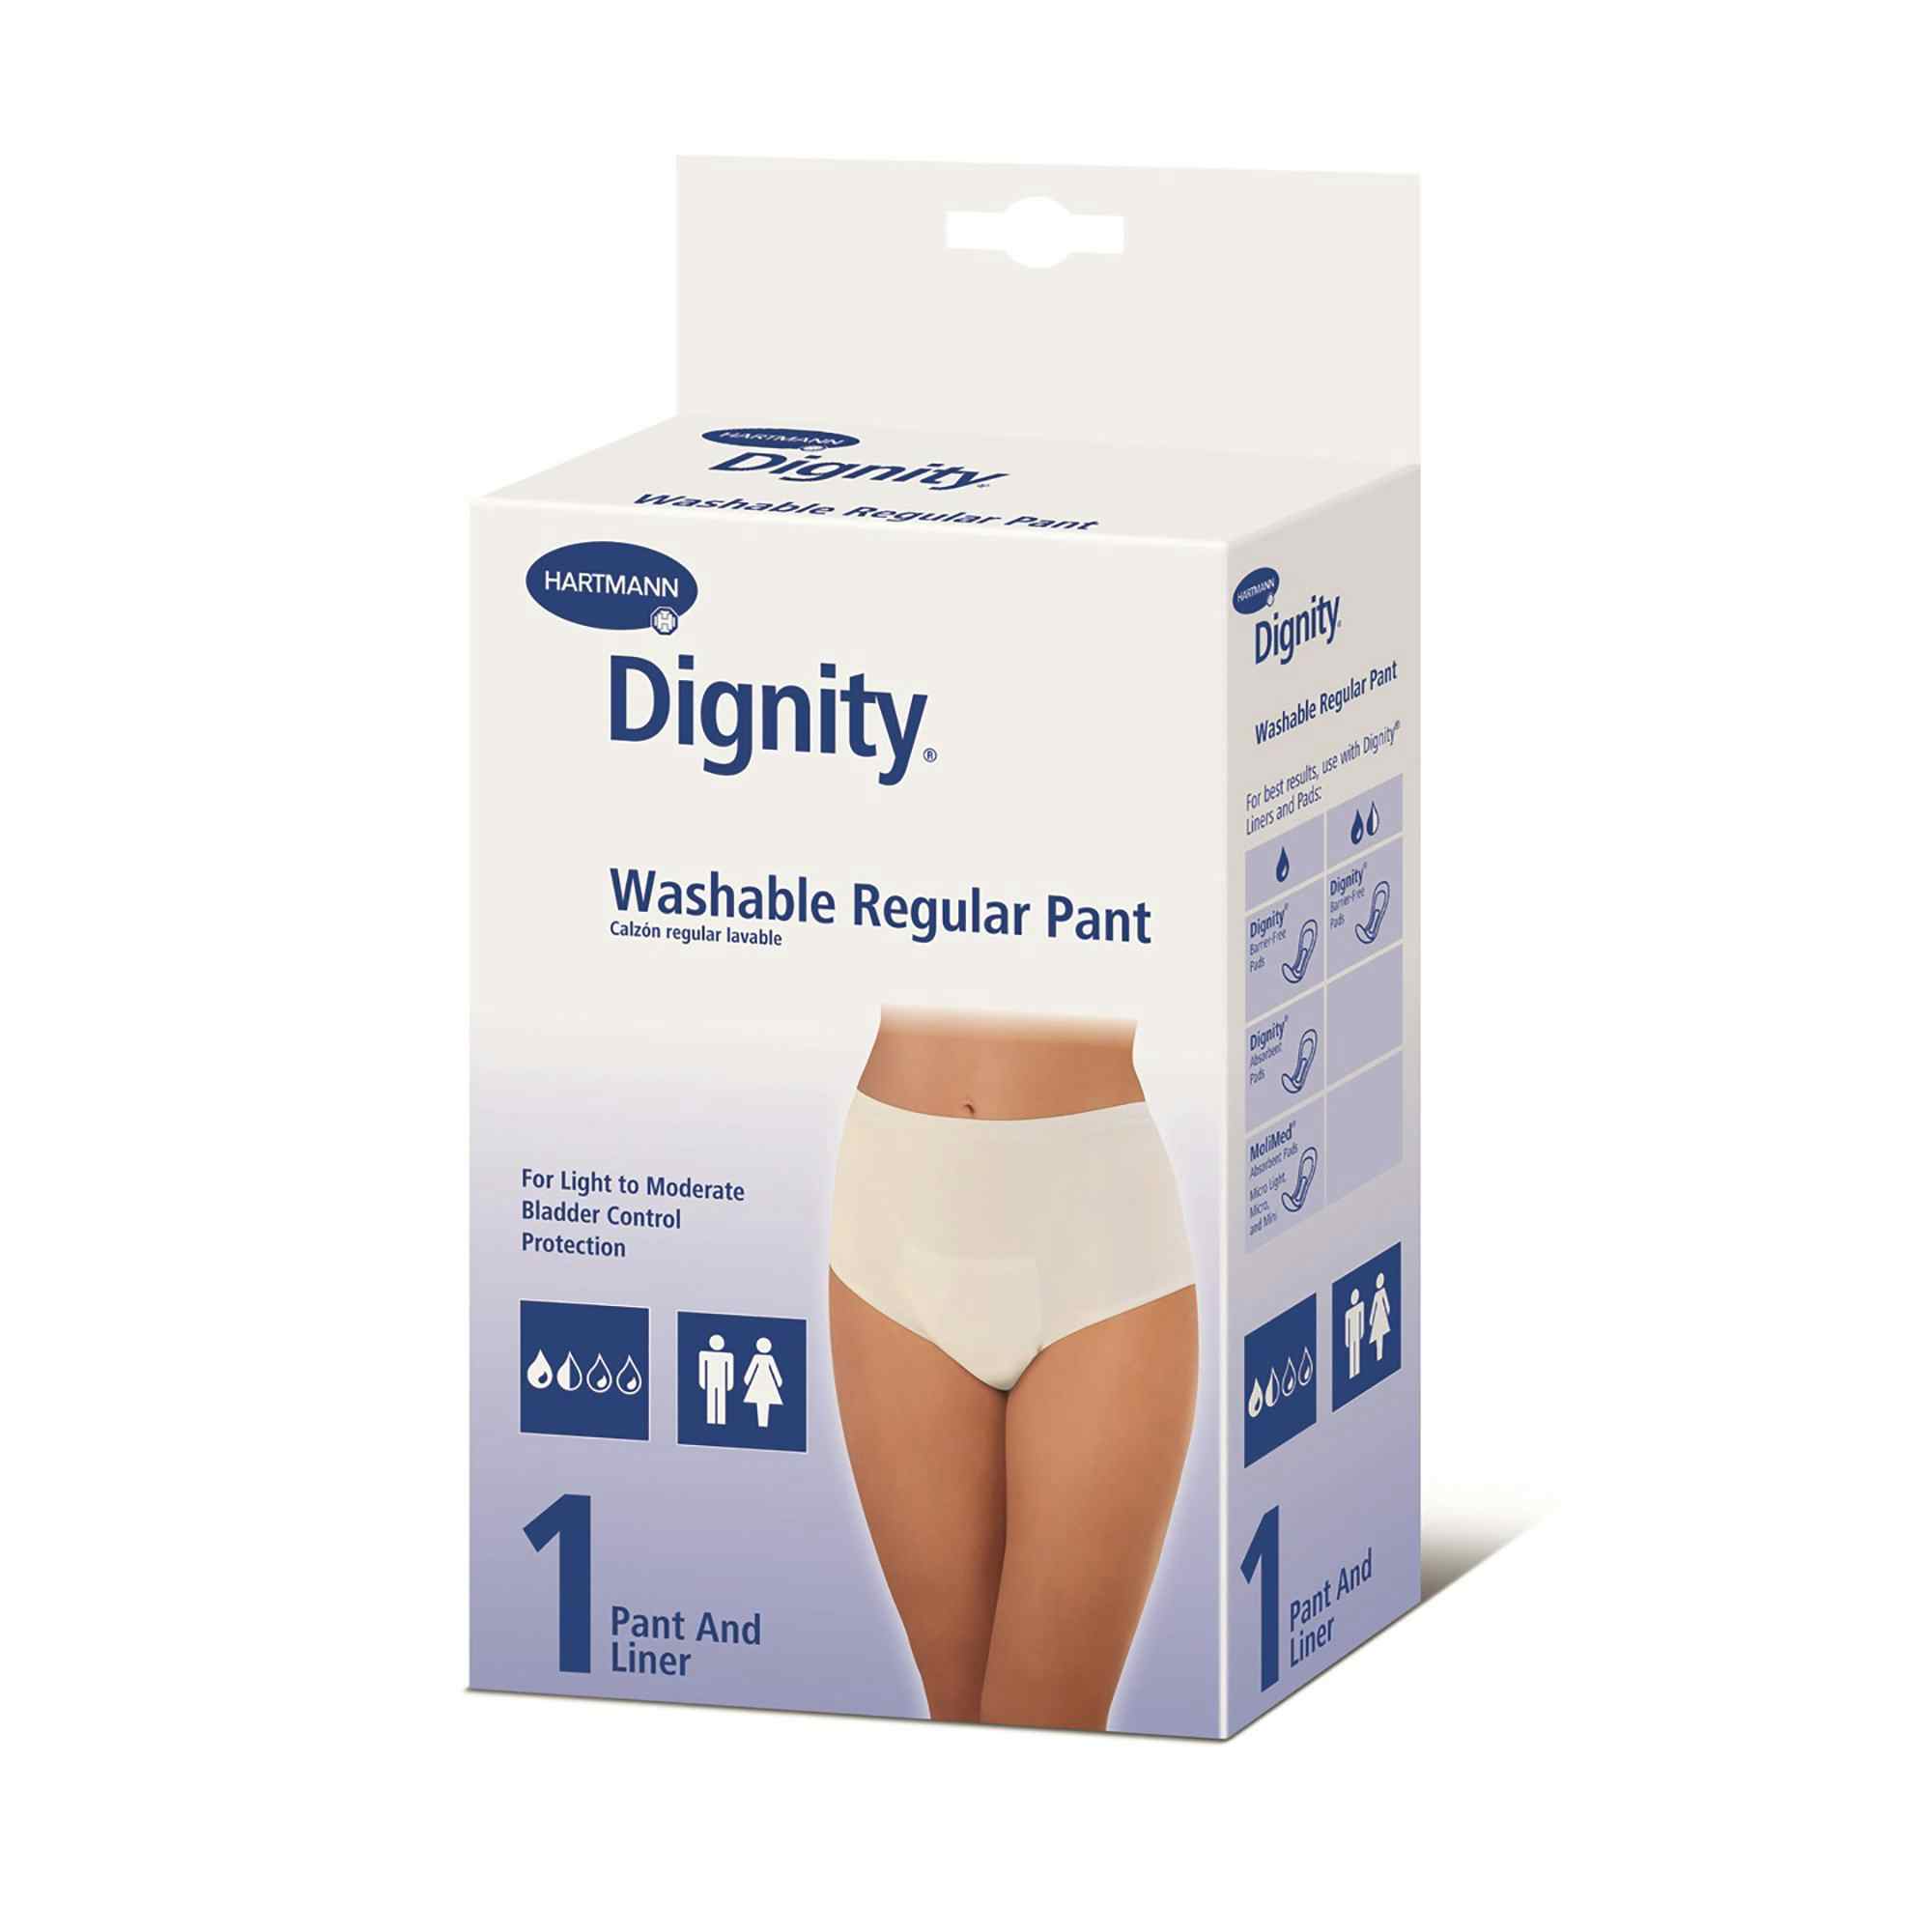 Dignity Unisex Pull On Reusable Protective Underwear with Liner, 16903, Medium (36-41") - 1 Each